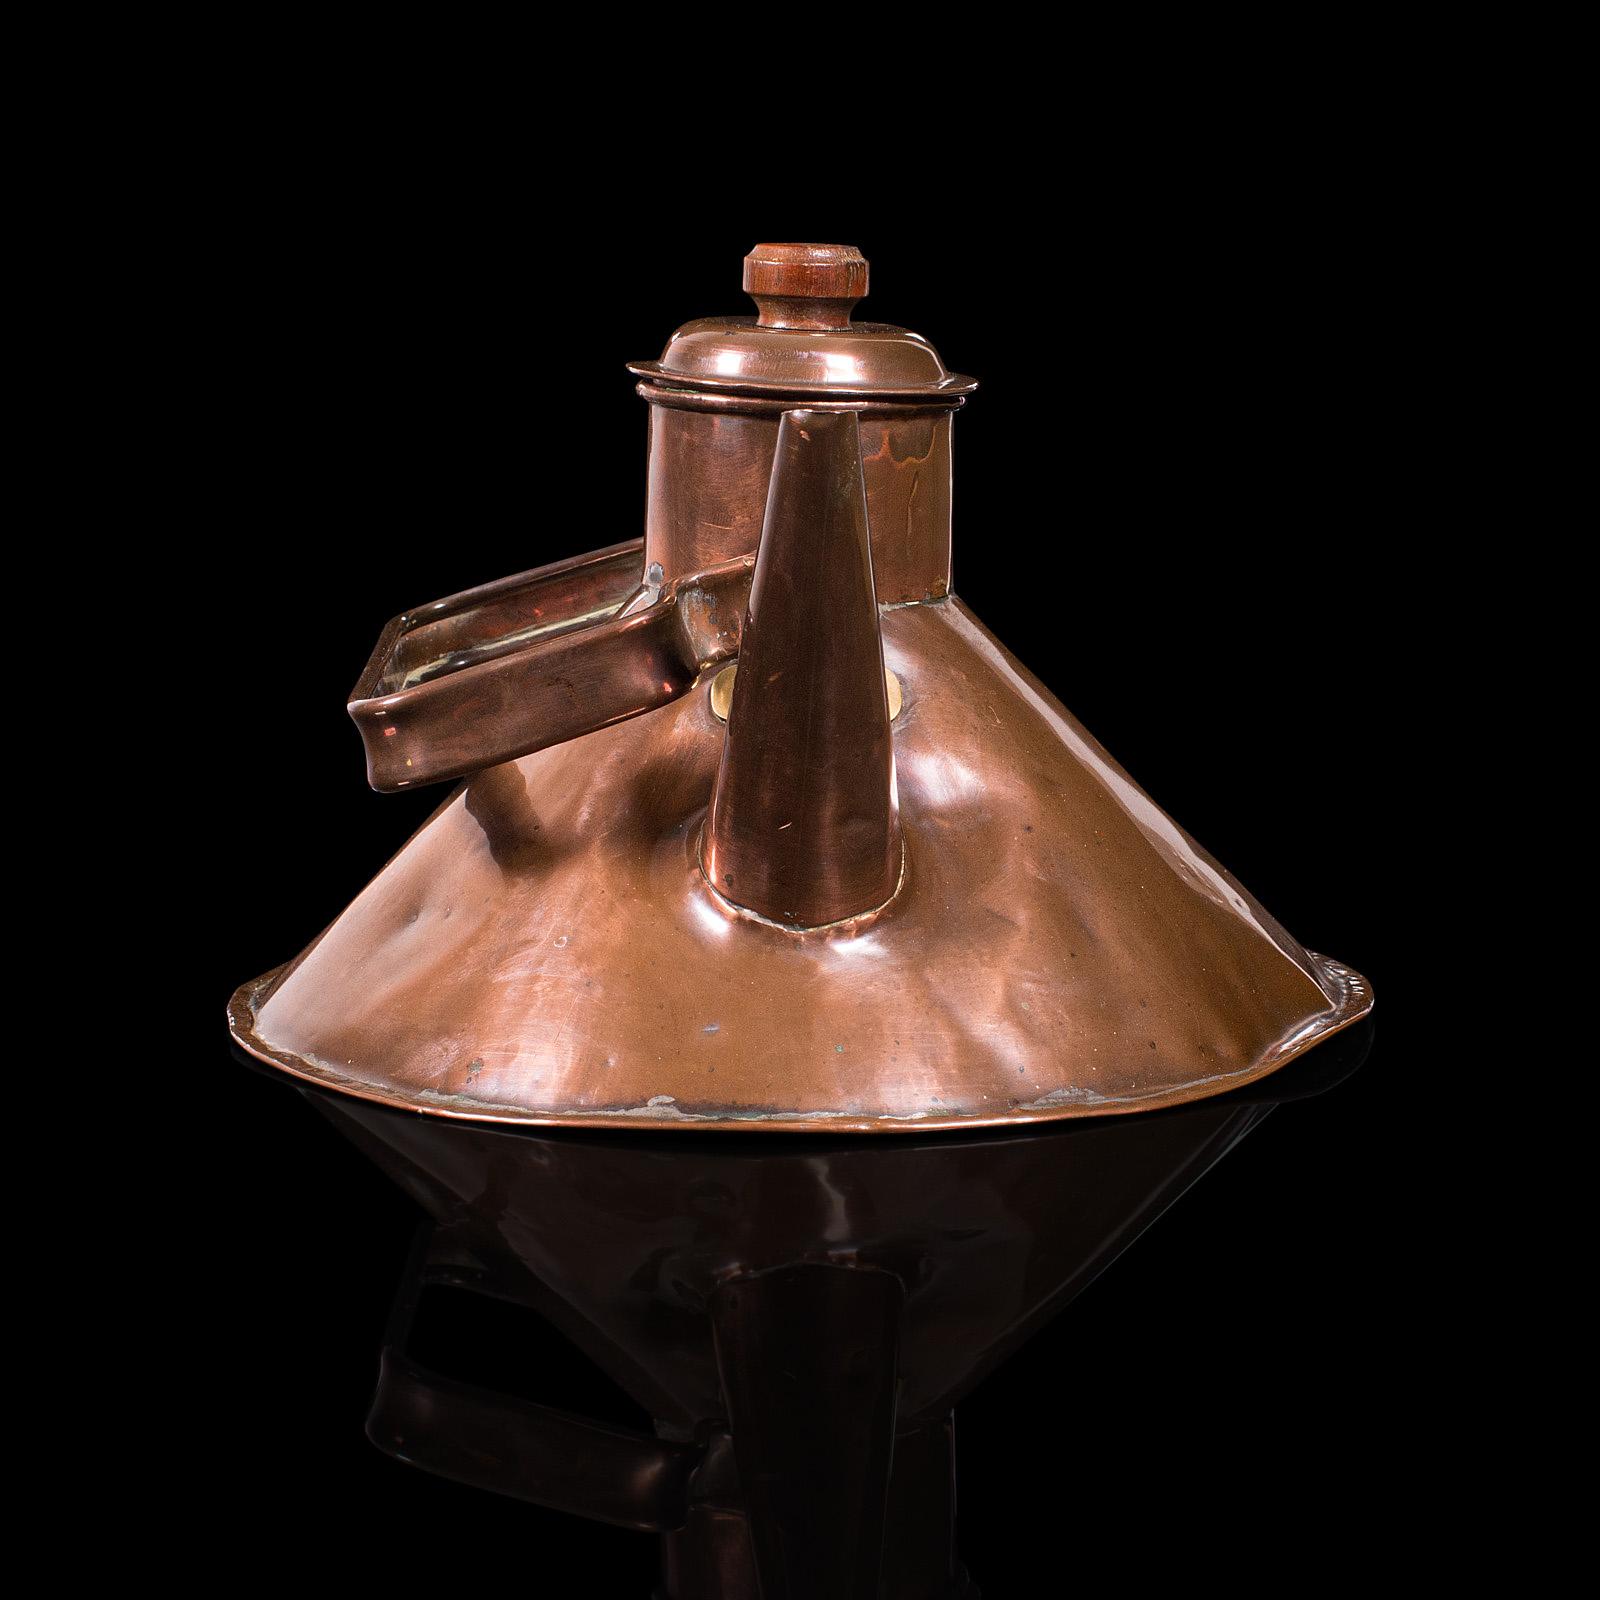 This is an antique stove kettle. An English, copper kitchen teakettle, dating to the late Victorian period, circa 1900.

Charming antique kettle with wonderful weathered appeal
Displays a desirable aged patina throughout
Patinated copper